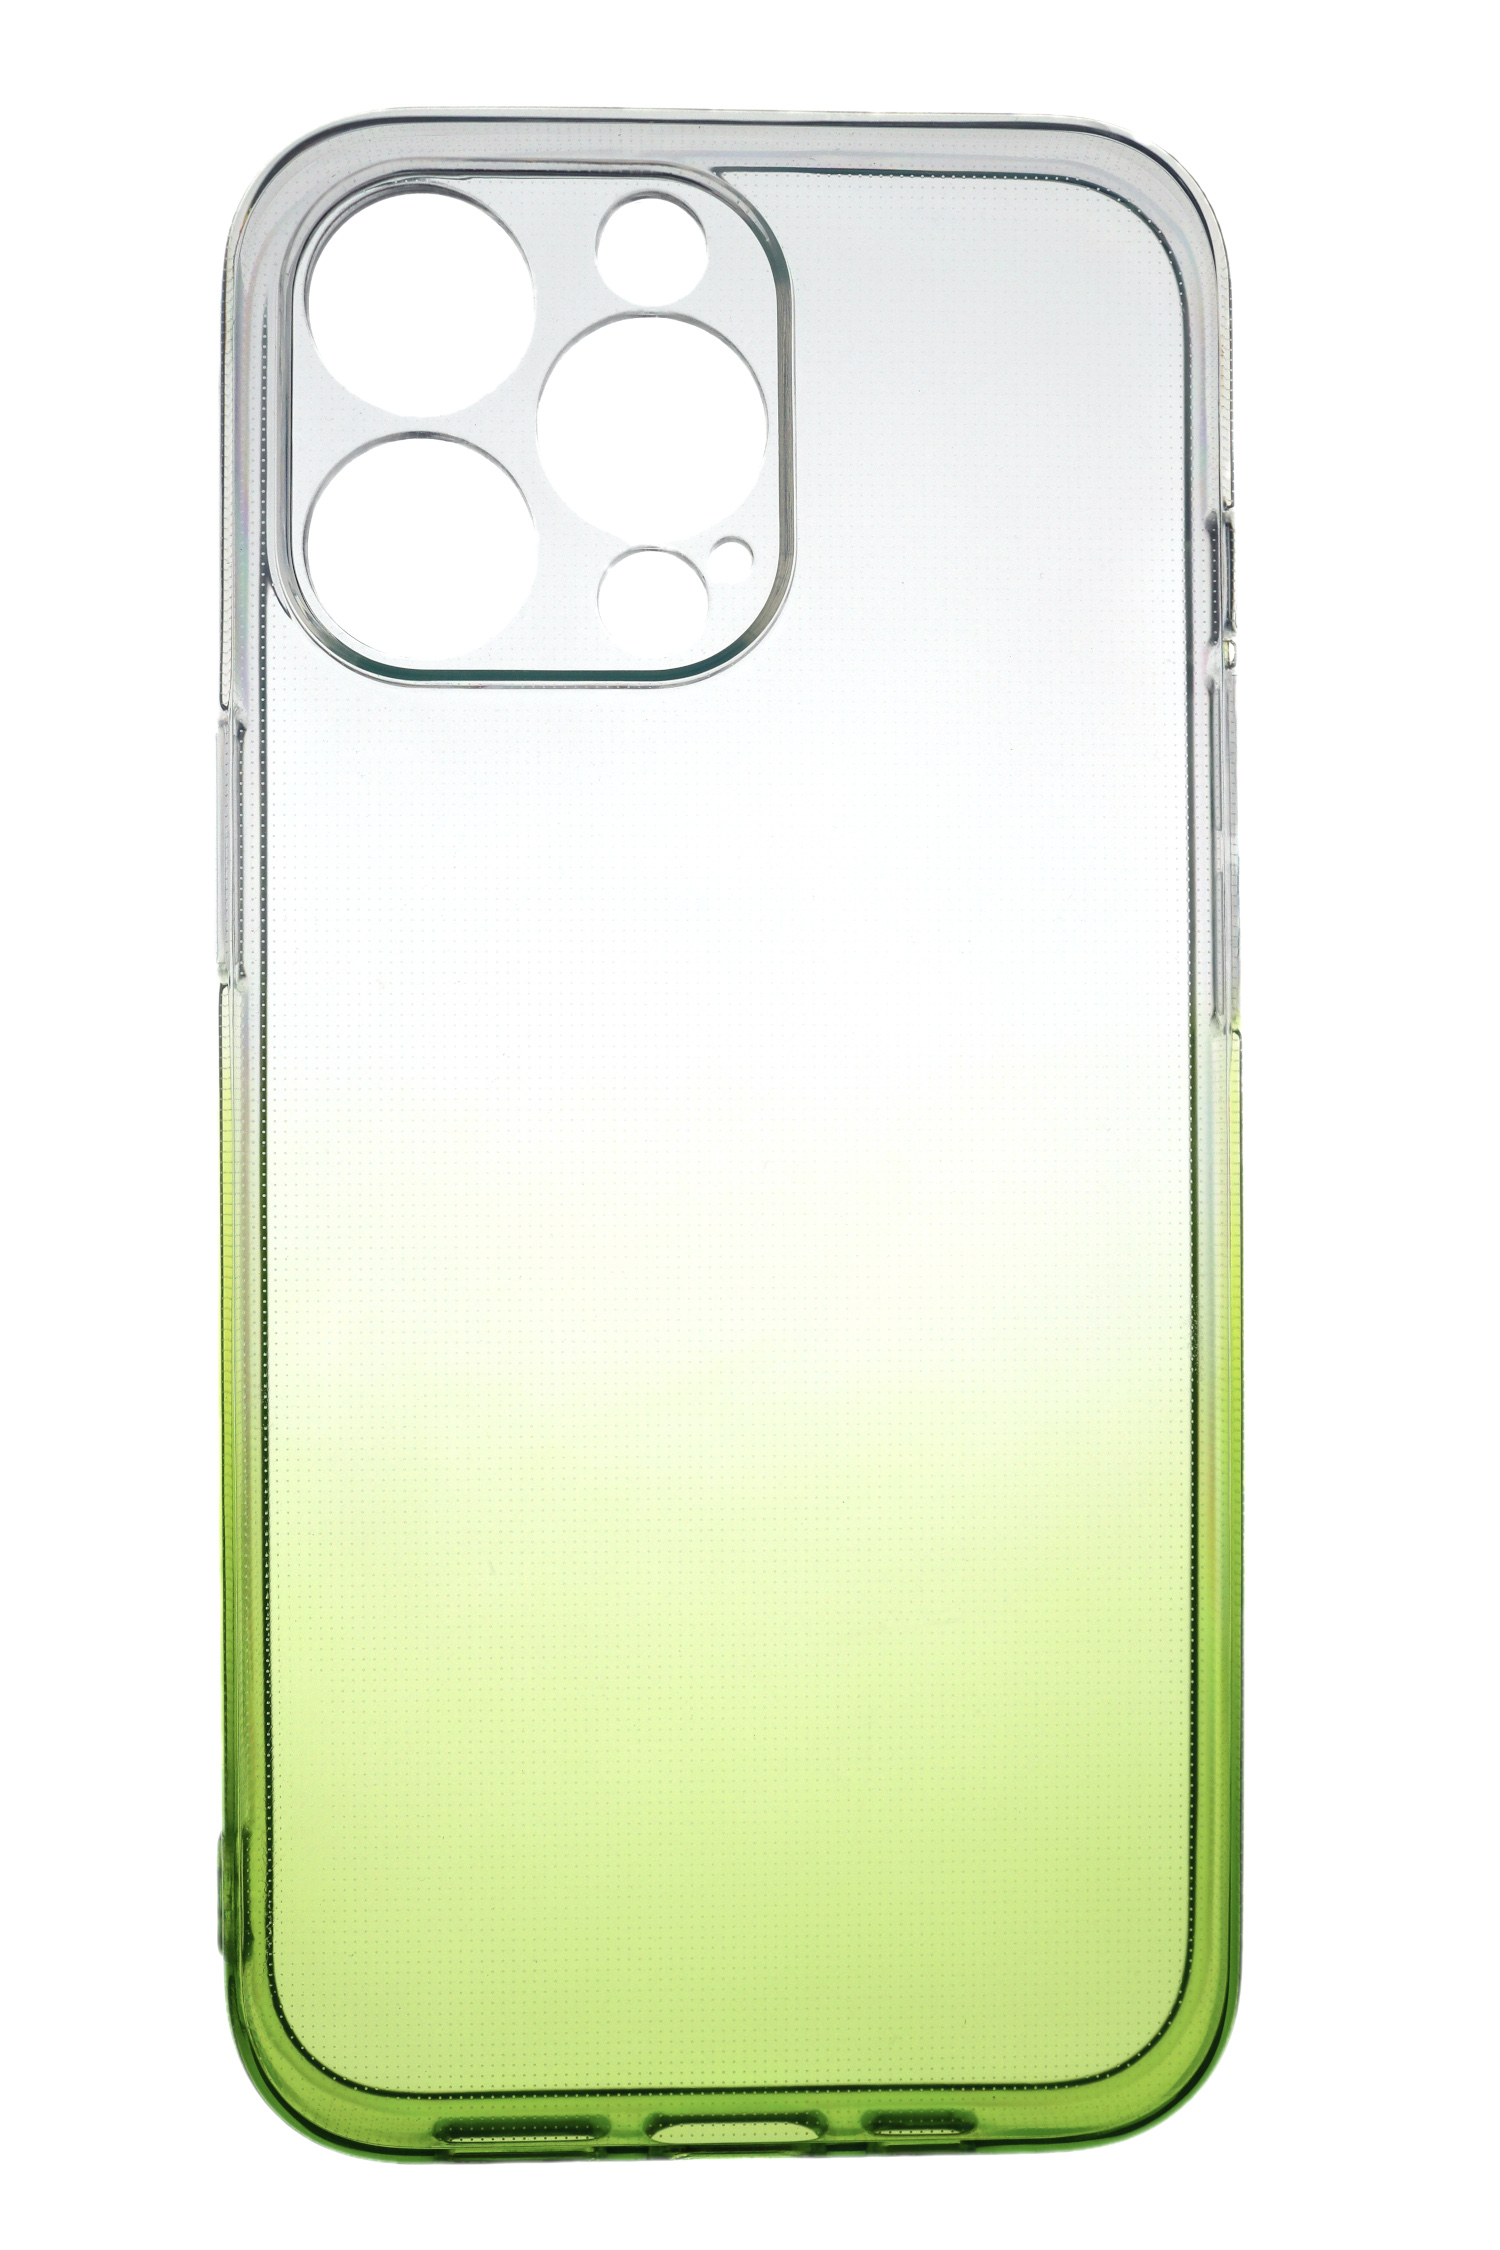 JAMCOVER 2.0 mm iPhone Case Max, Strong, Transparent Pro Apple, Backcover, 14 Grün, TPU